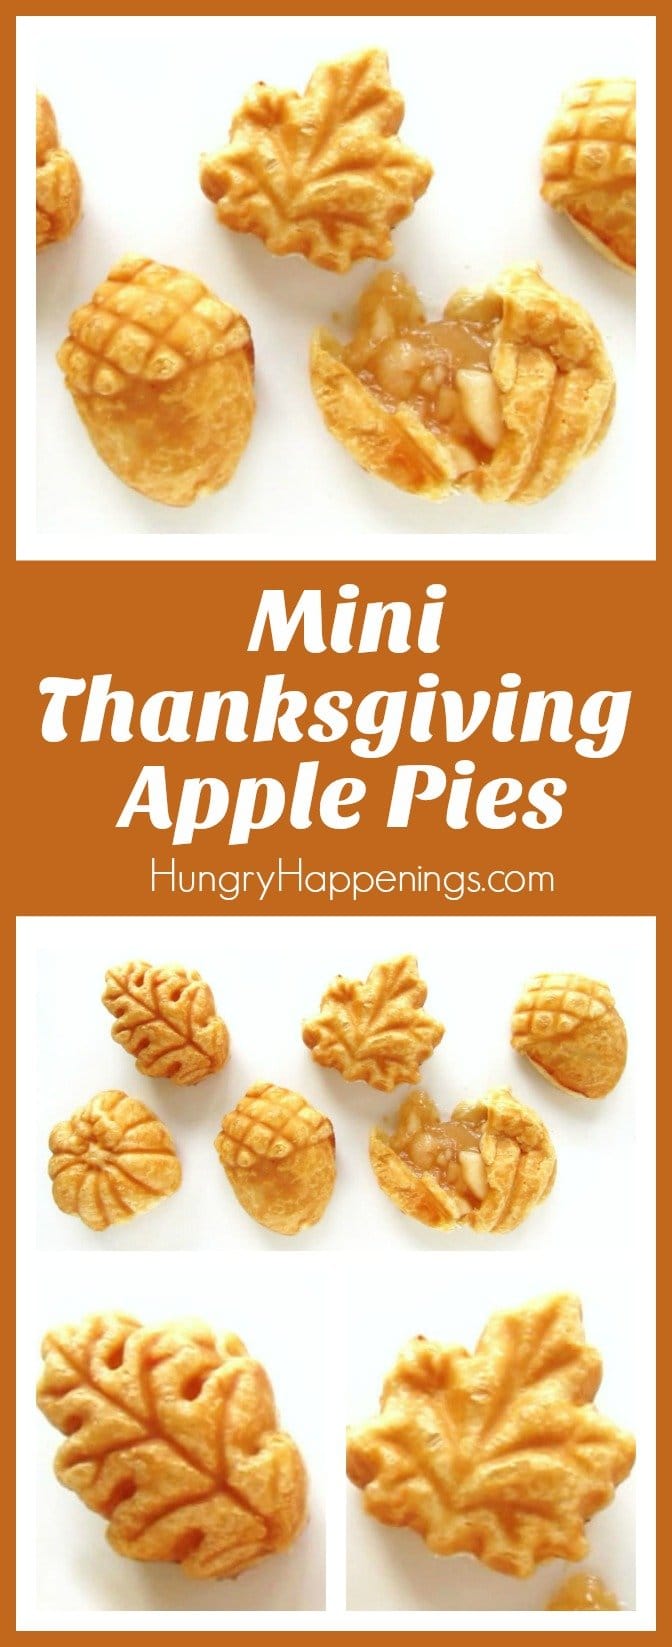 Dress up you holiday table by making these beautiful acorn, pumpkin, and leaf shaped Mini Thanksgiving Apple Pies. See how easy they are to make at HungryHappenings.com.